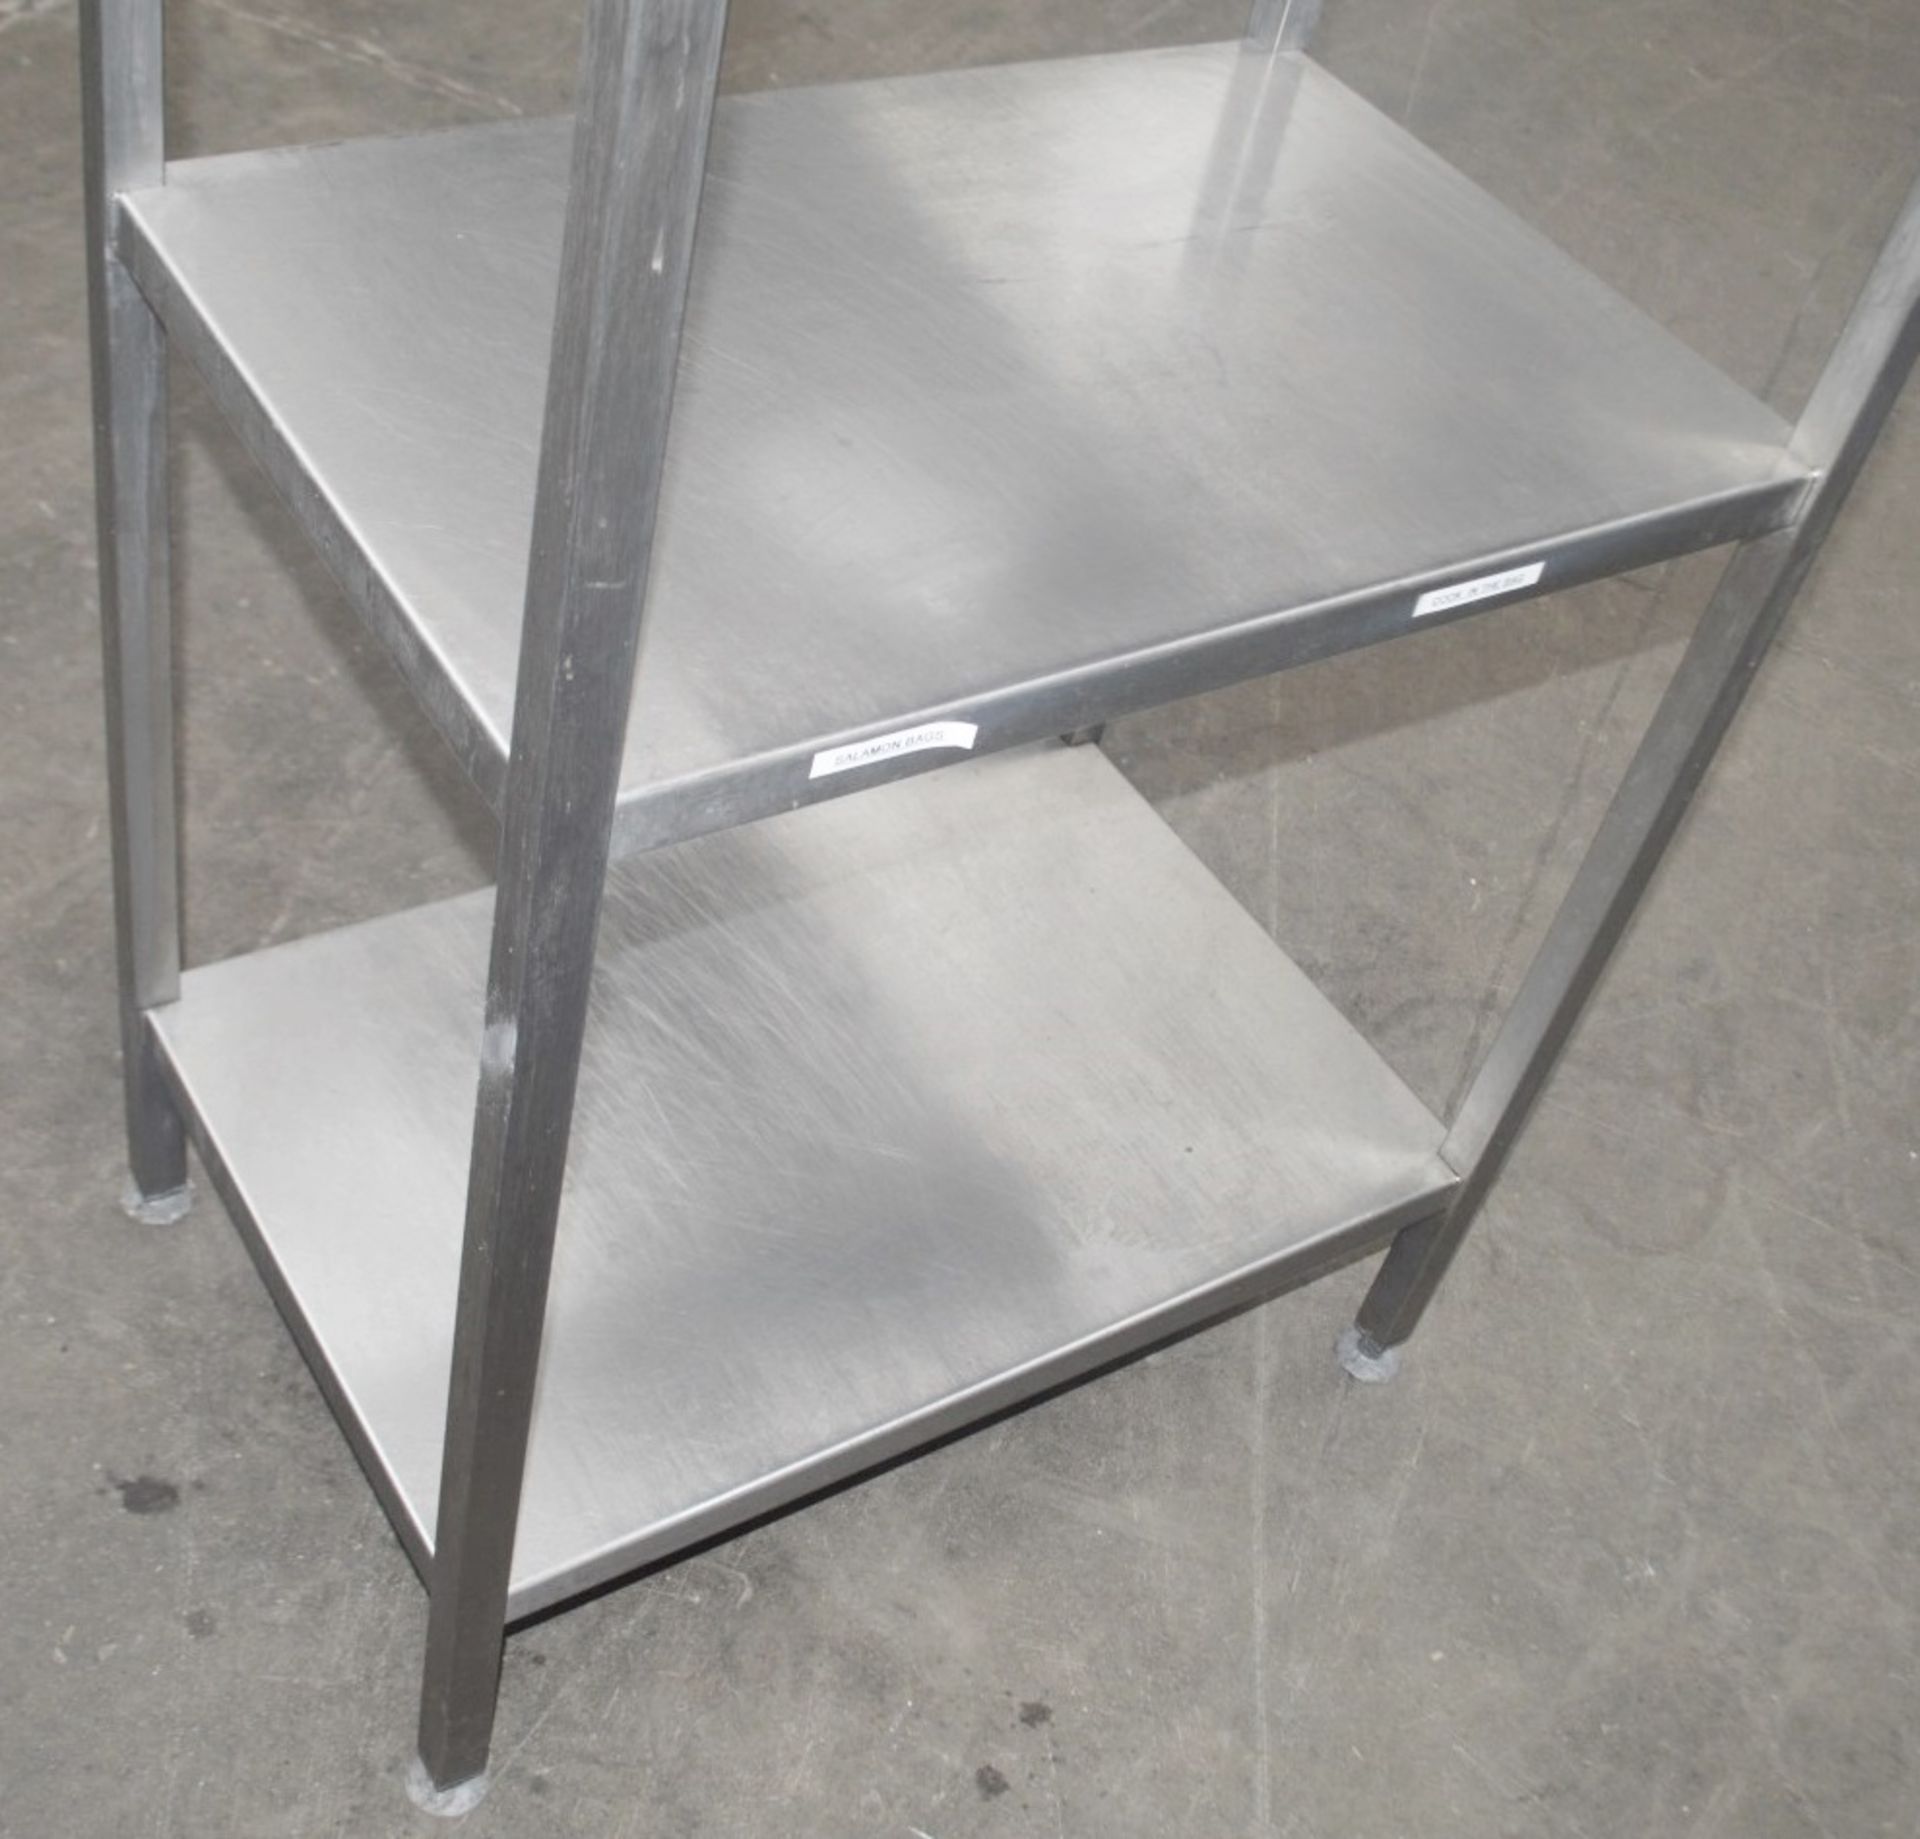 1 x Stainless Steel Commercial Kitchen 4-Tier Shelving Unit - Dimensions: H188 x W74 x D49cm - - Image 4 of 4